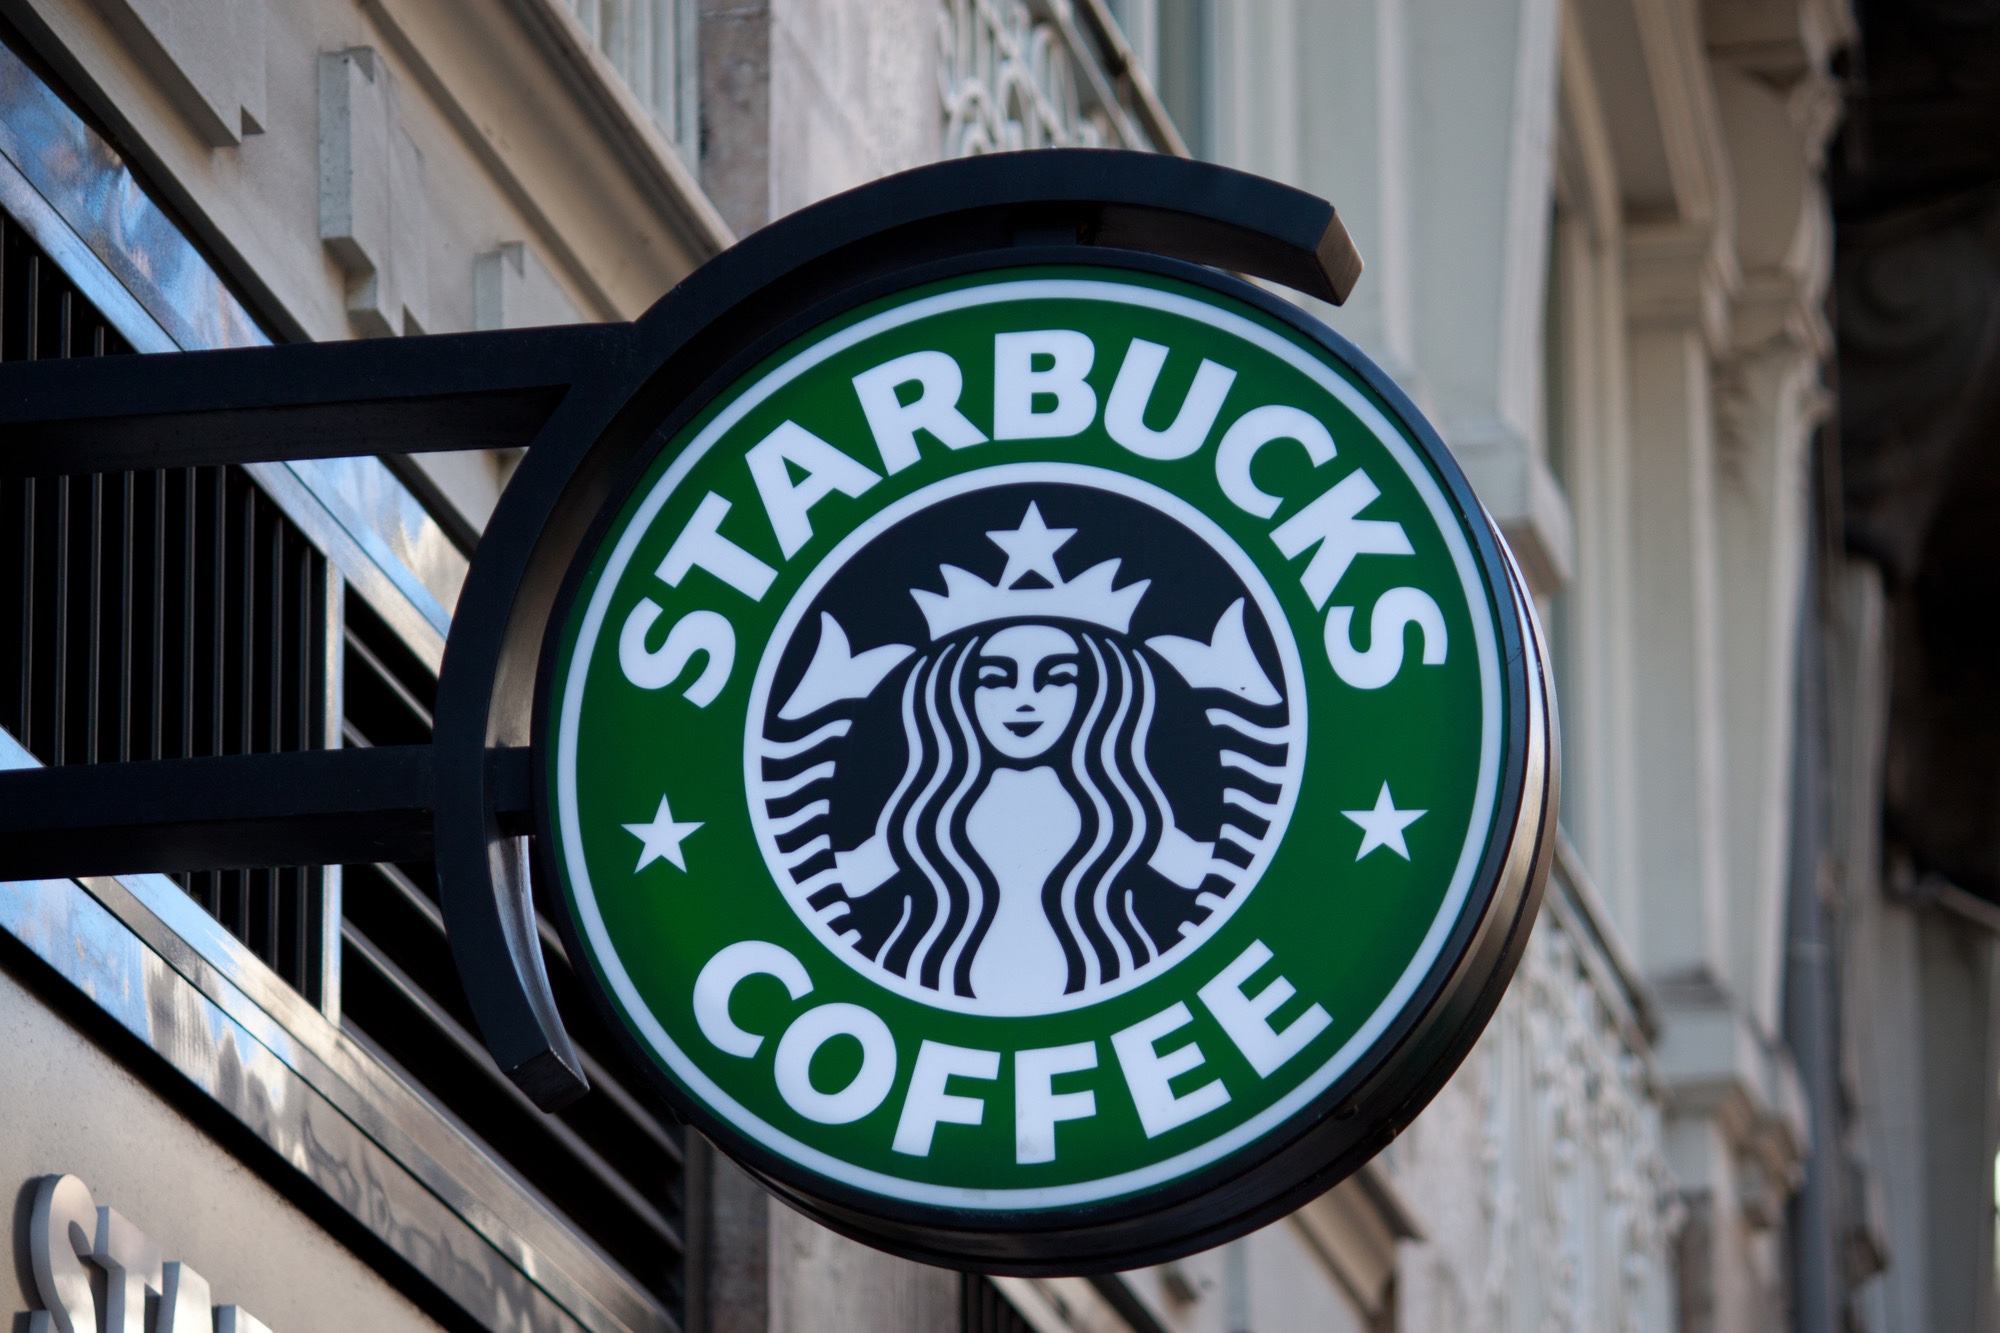 Starbucks sign hanging from building